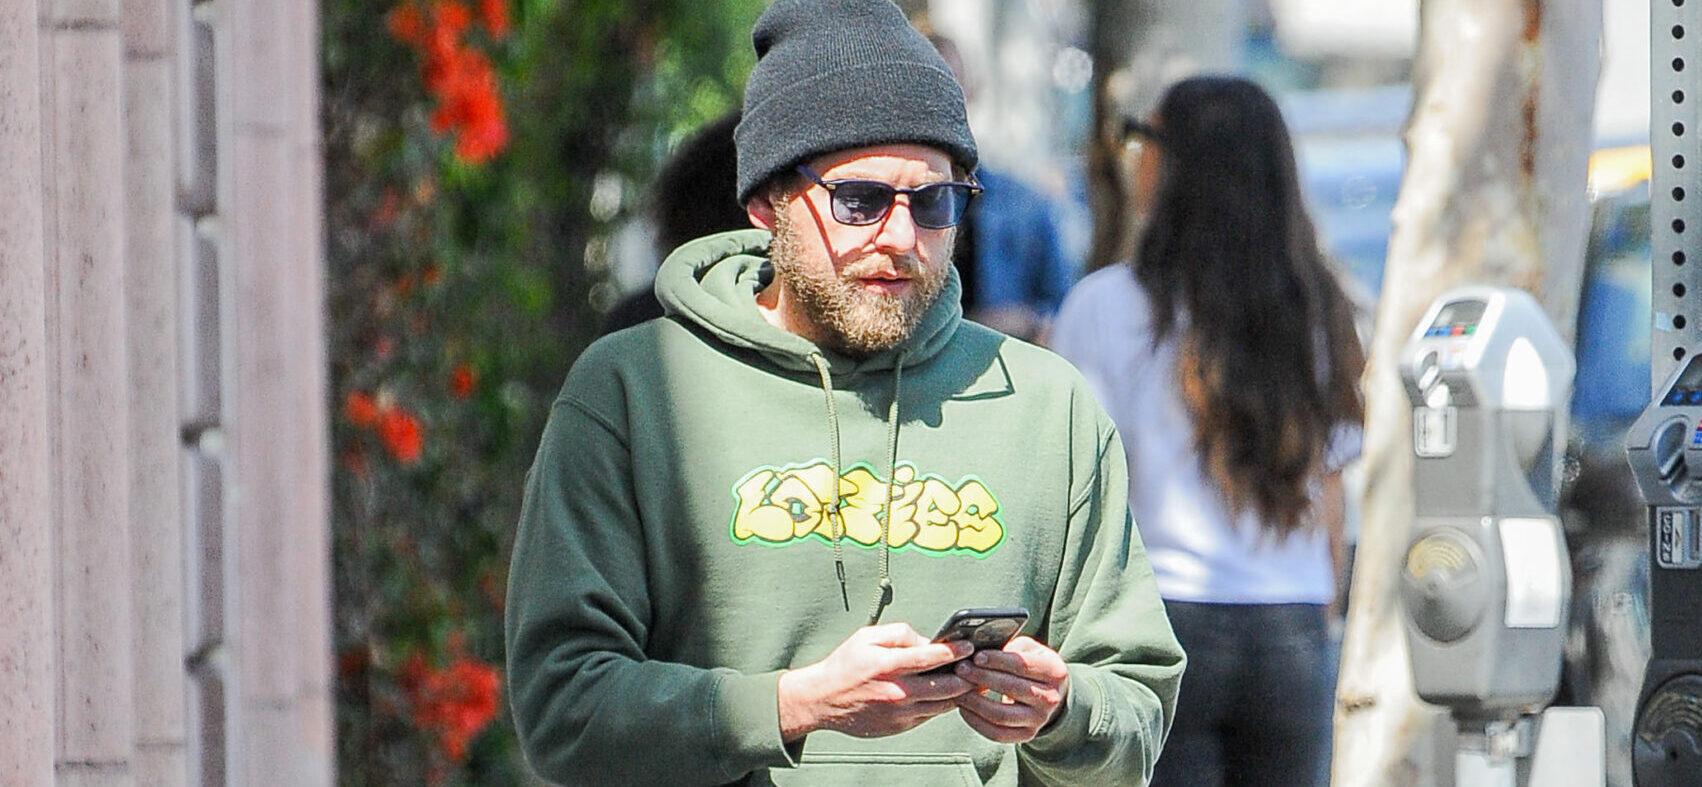 Amid abuse allegations, Jonah Hill is sporting a much leaner physique